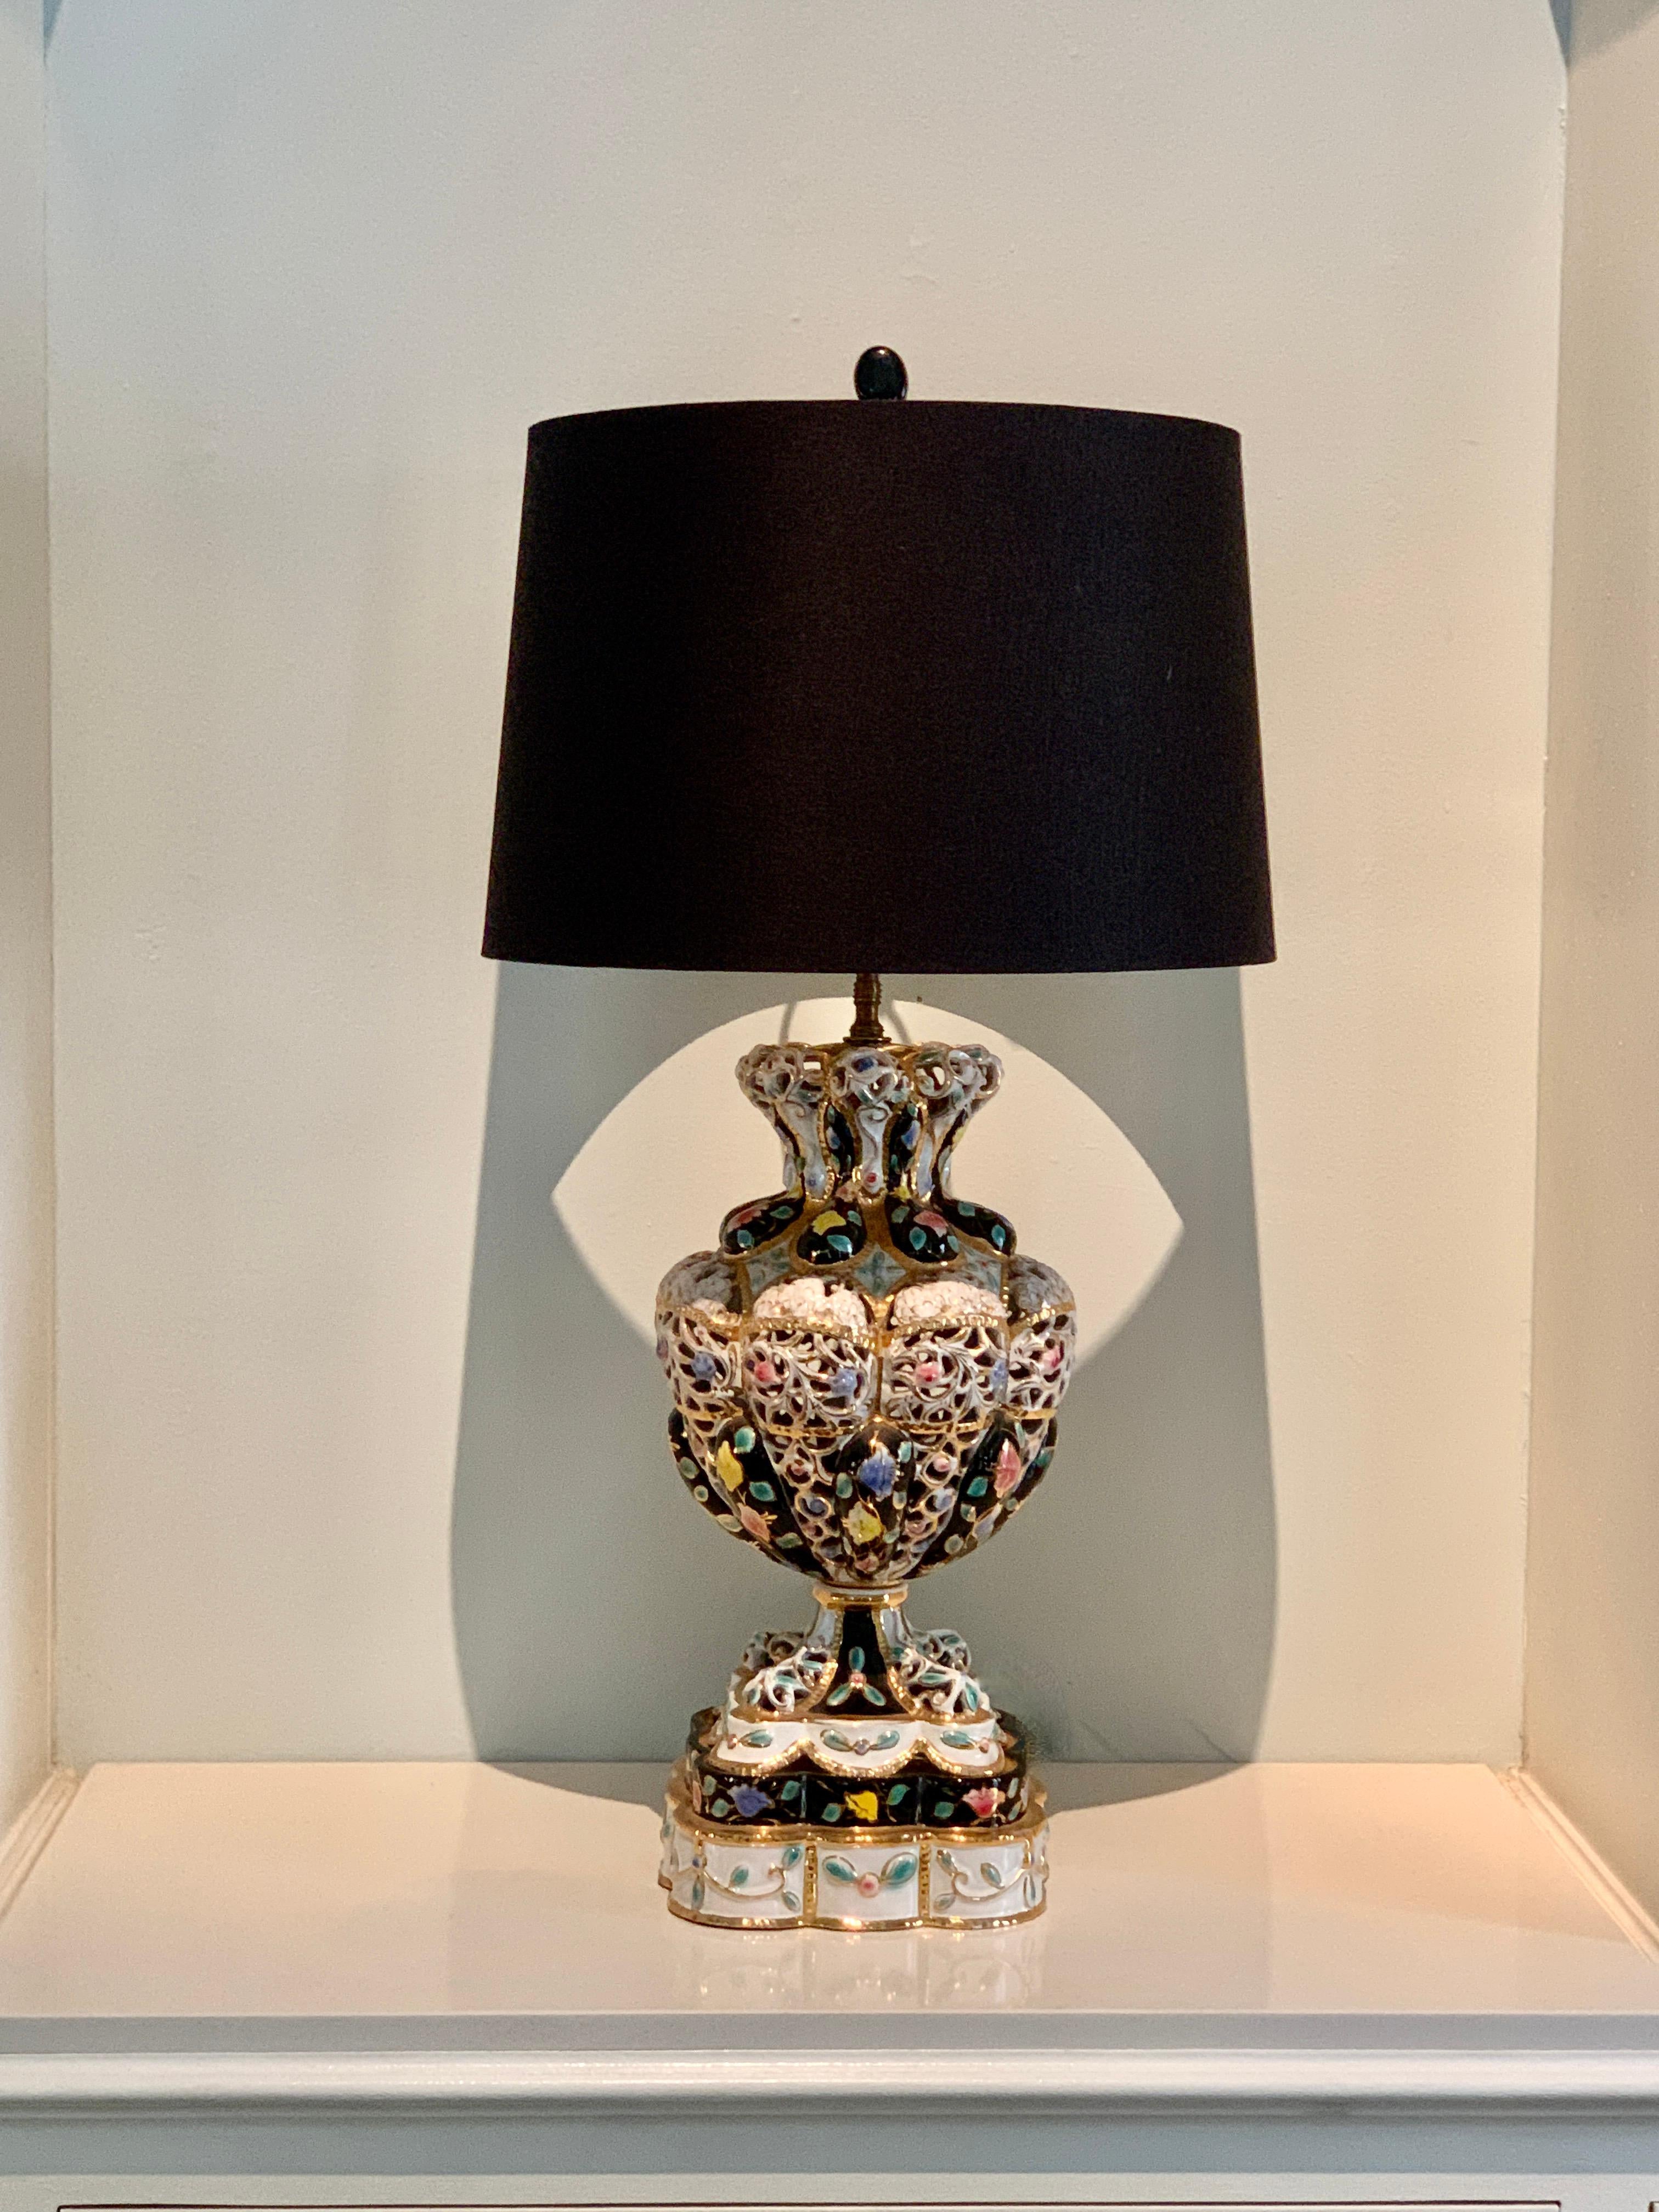 Hand-Painted Italian Porcelain Lamp in the Style of Capodimonte